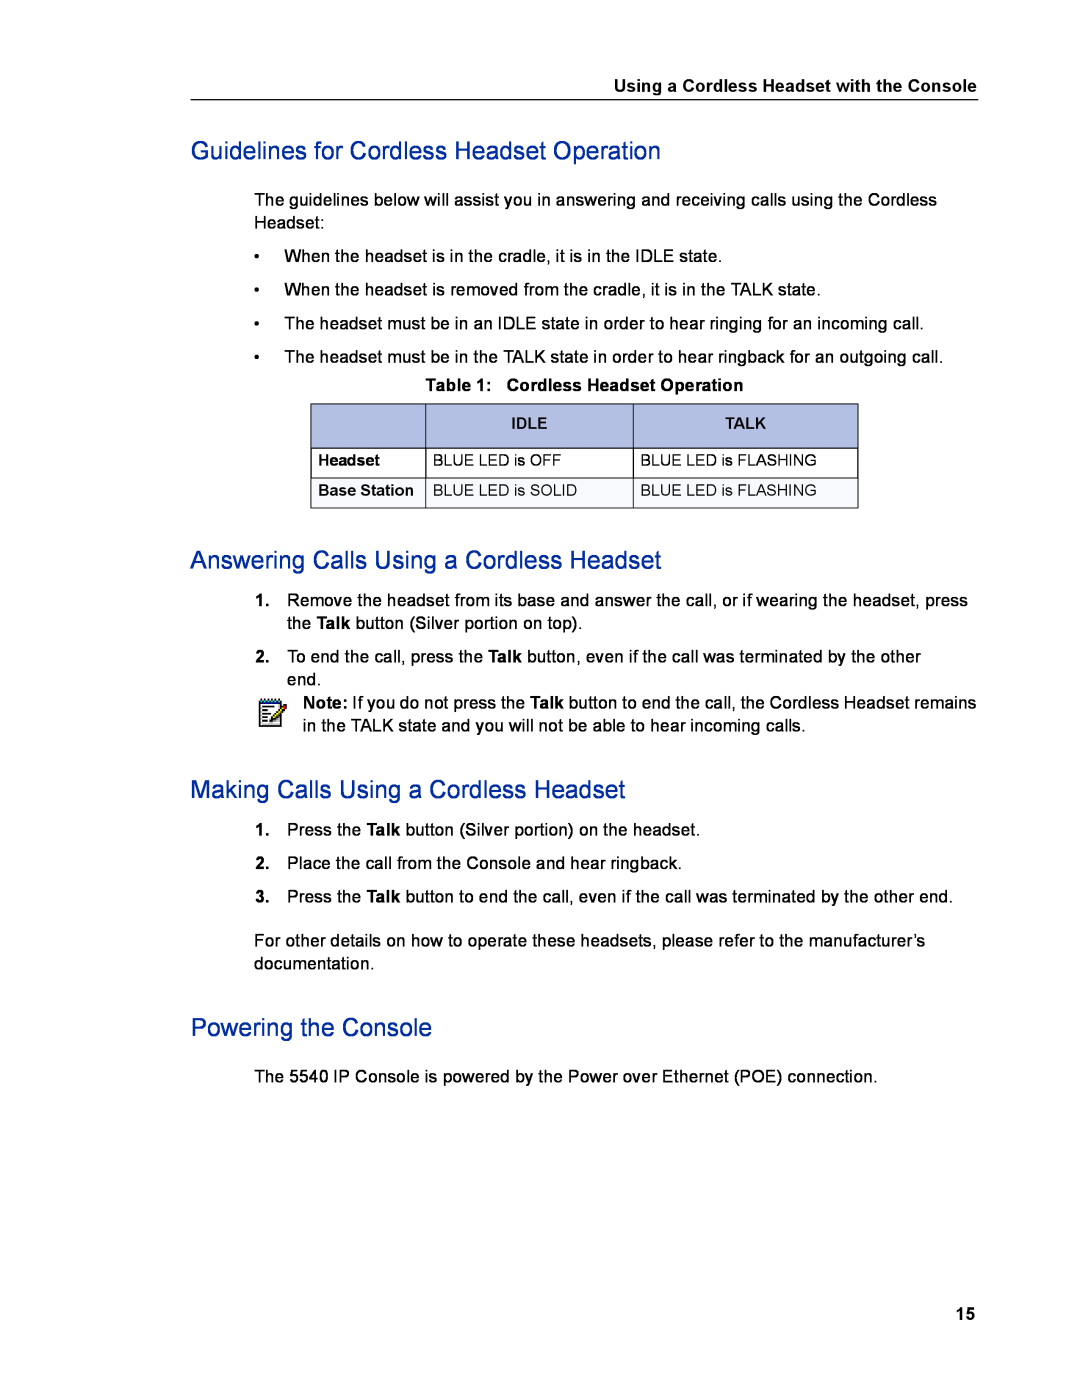 Mitel 5540 manual Guidelines for Cordless Headset Operation, Answering Calls Using a Cordless Headset, Powering the Console 